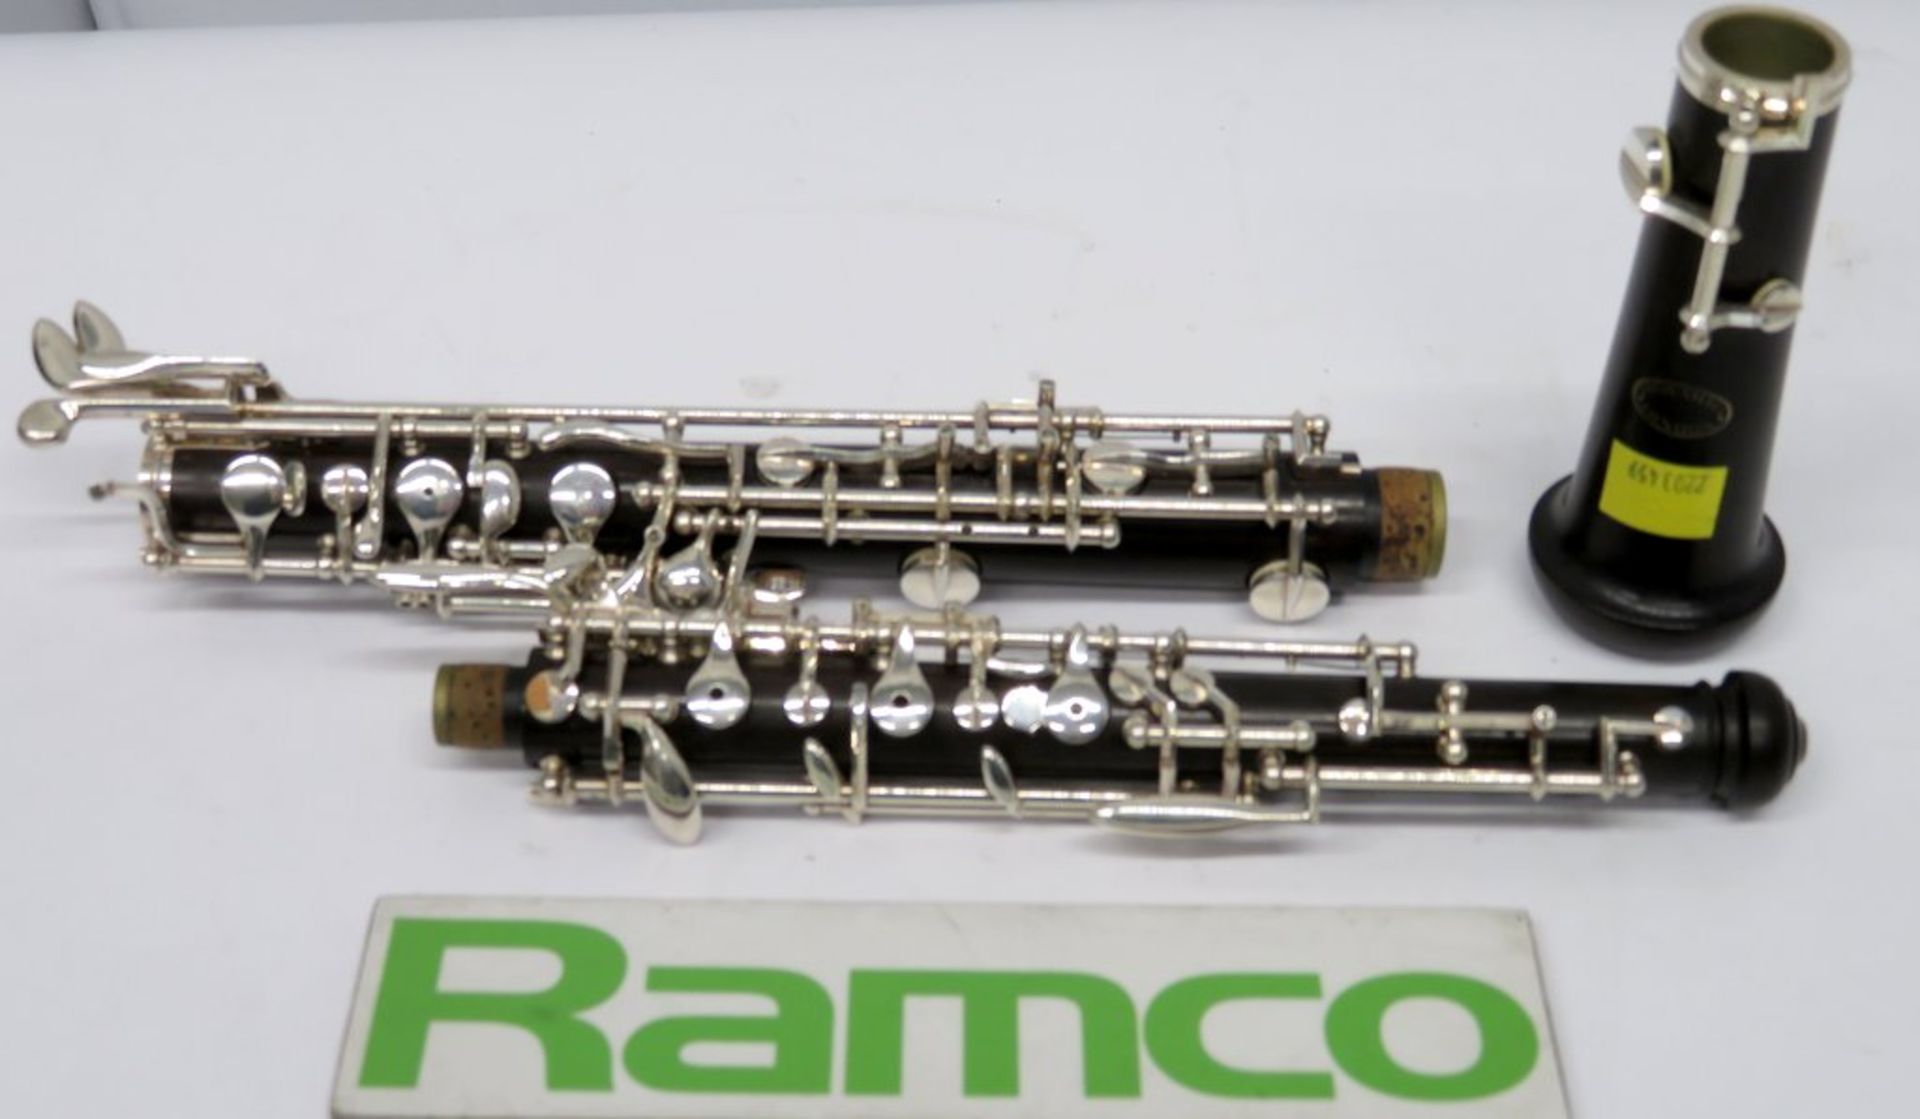 Howarth Of London S40c Oboe Complete With Case. - Image 3 of 20